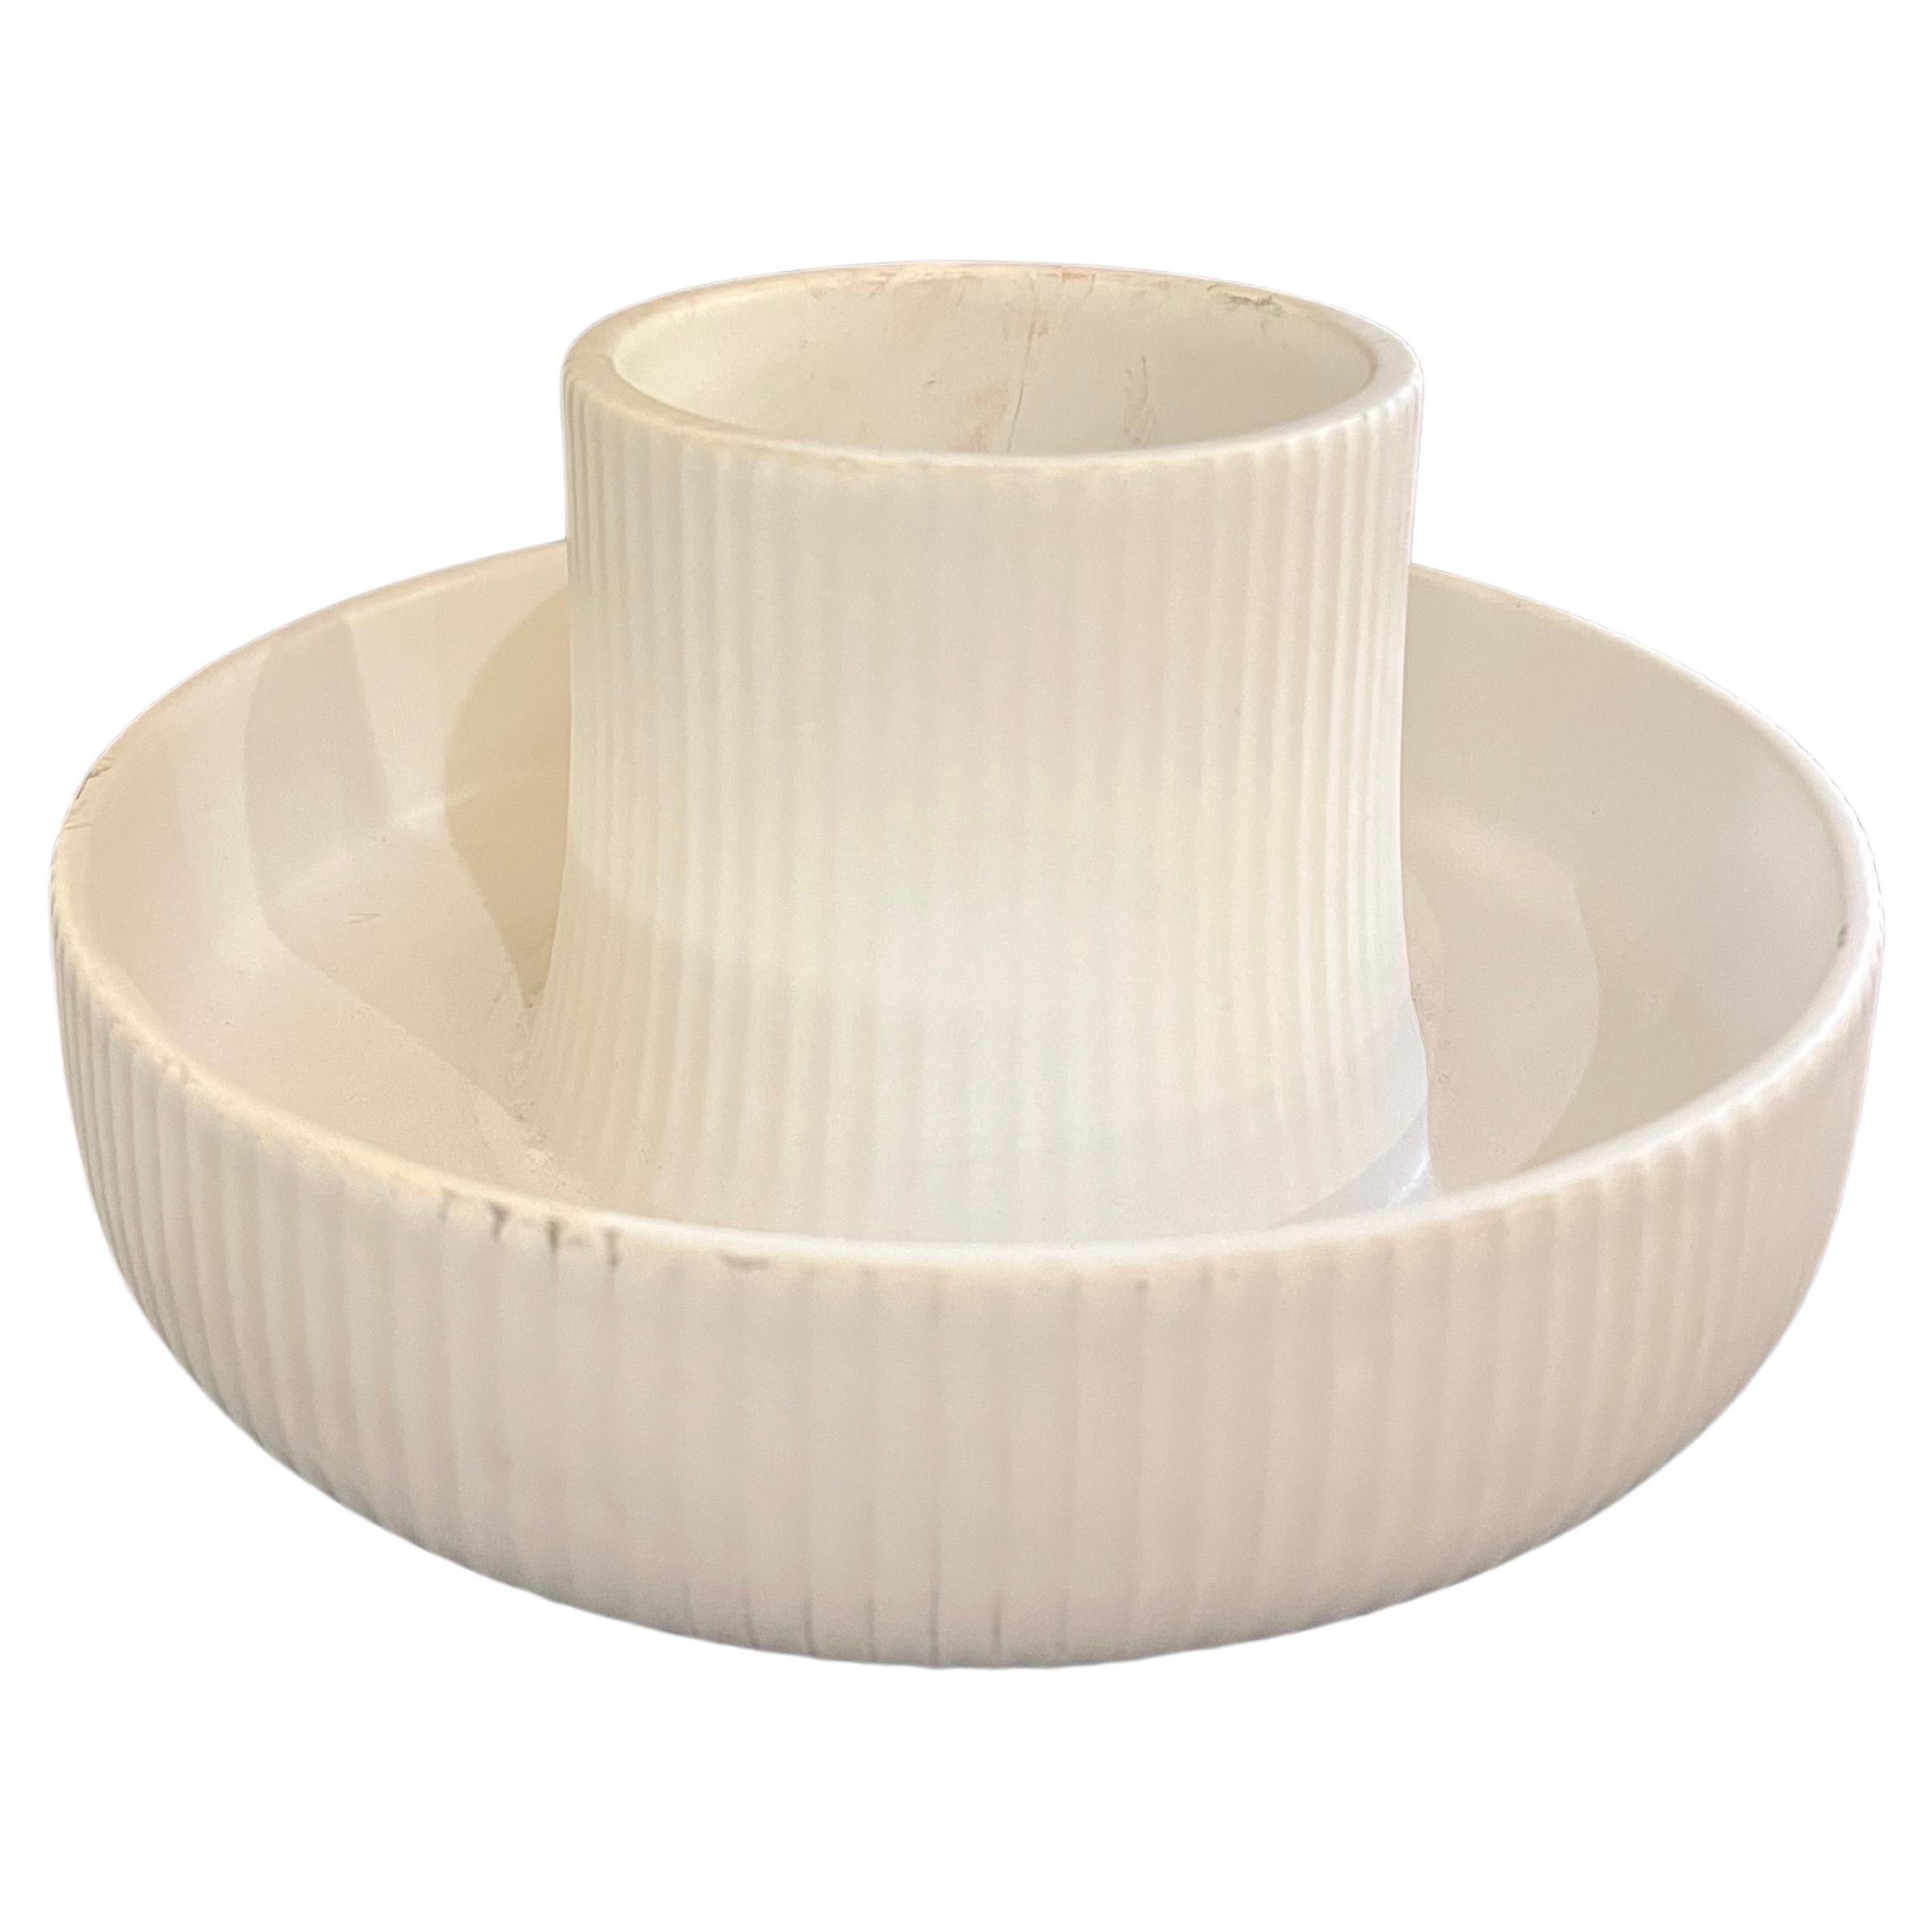 Canadian Ceramic Bowl by Sung Wook Park for Umbra For Sale